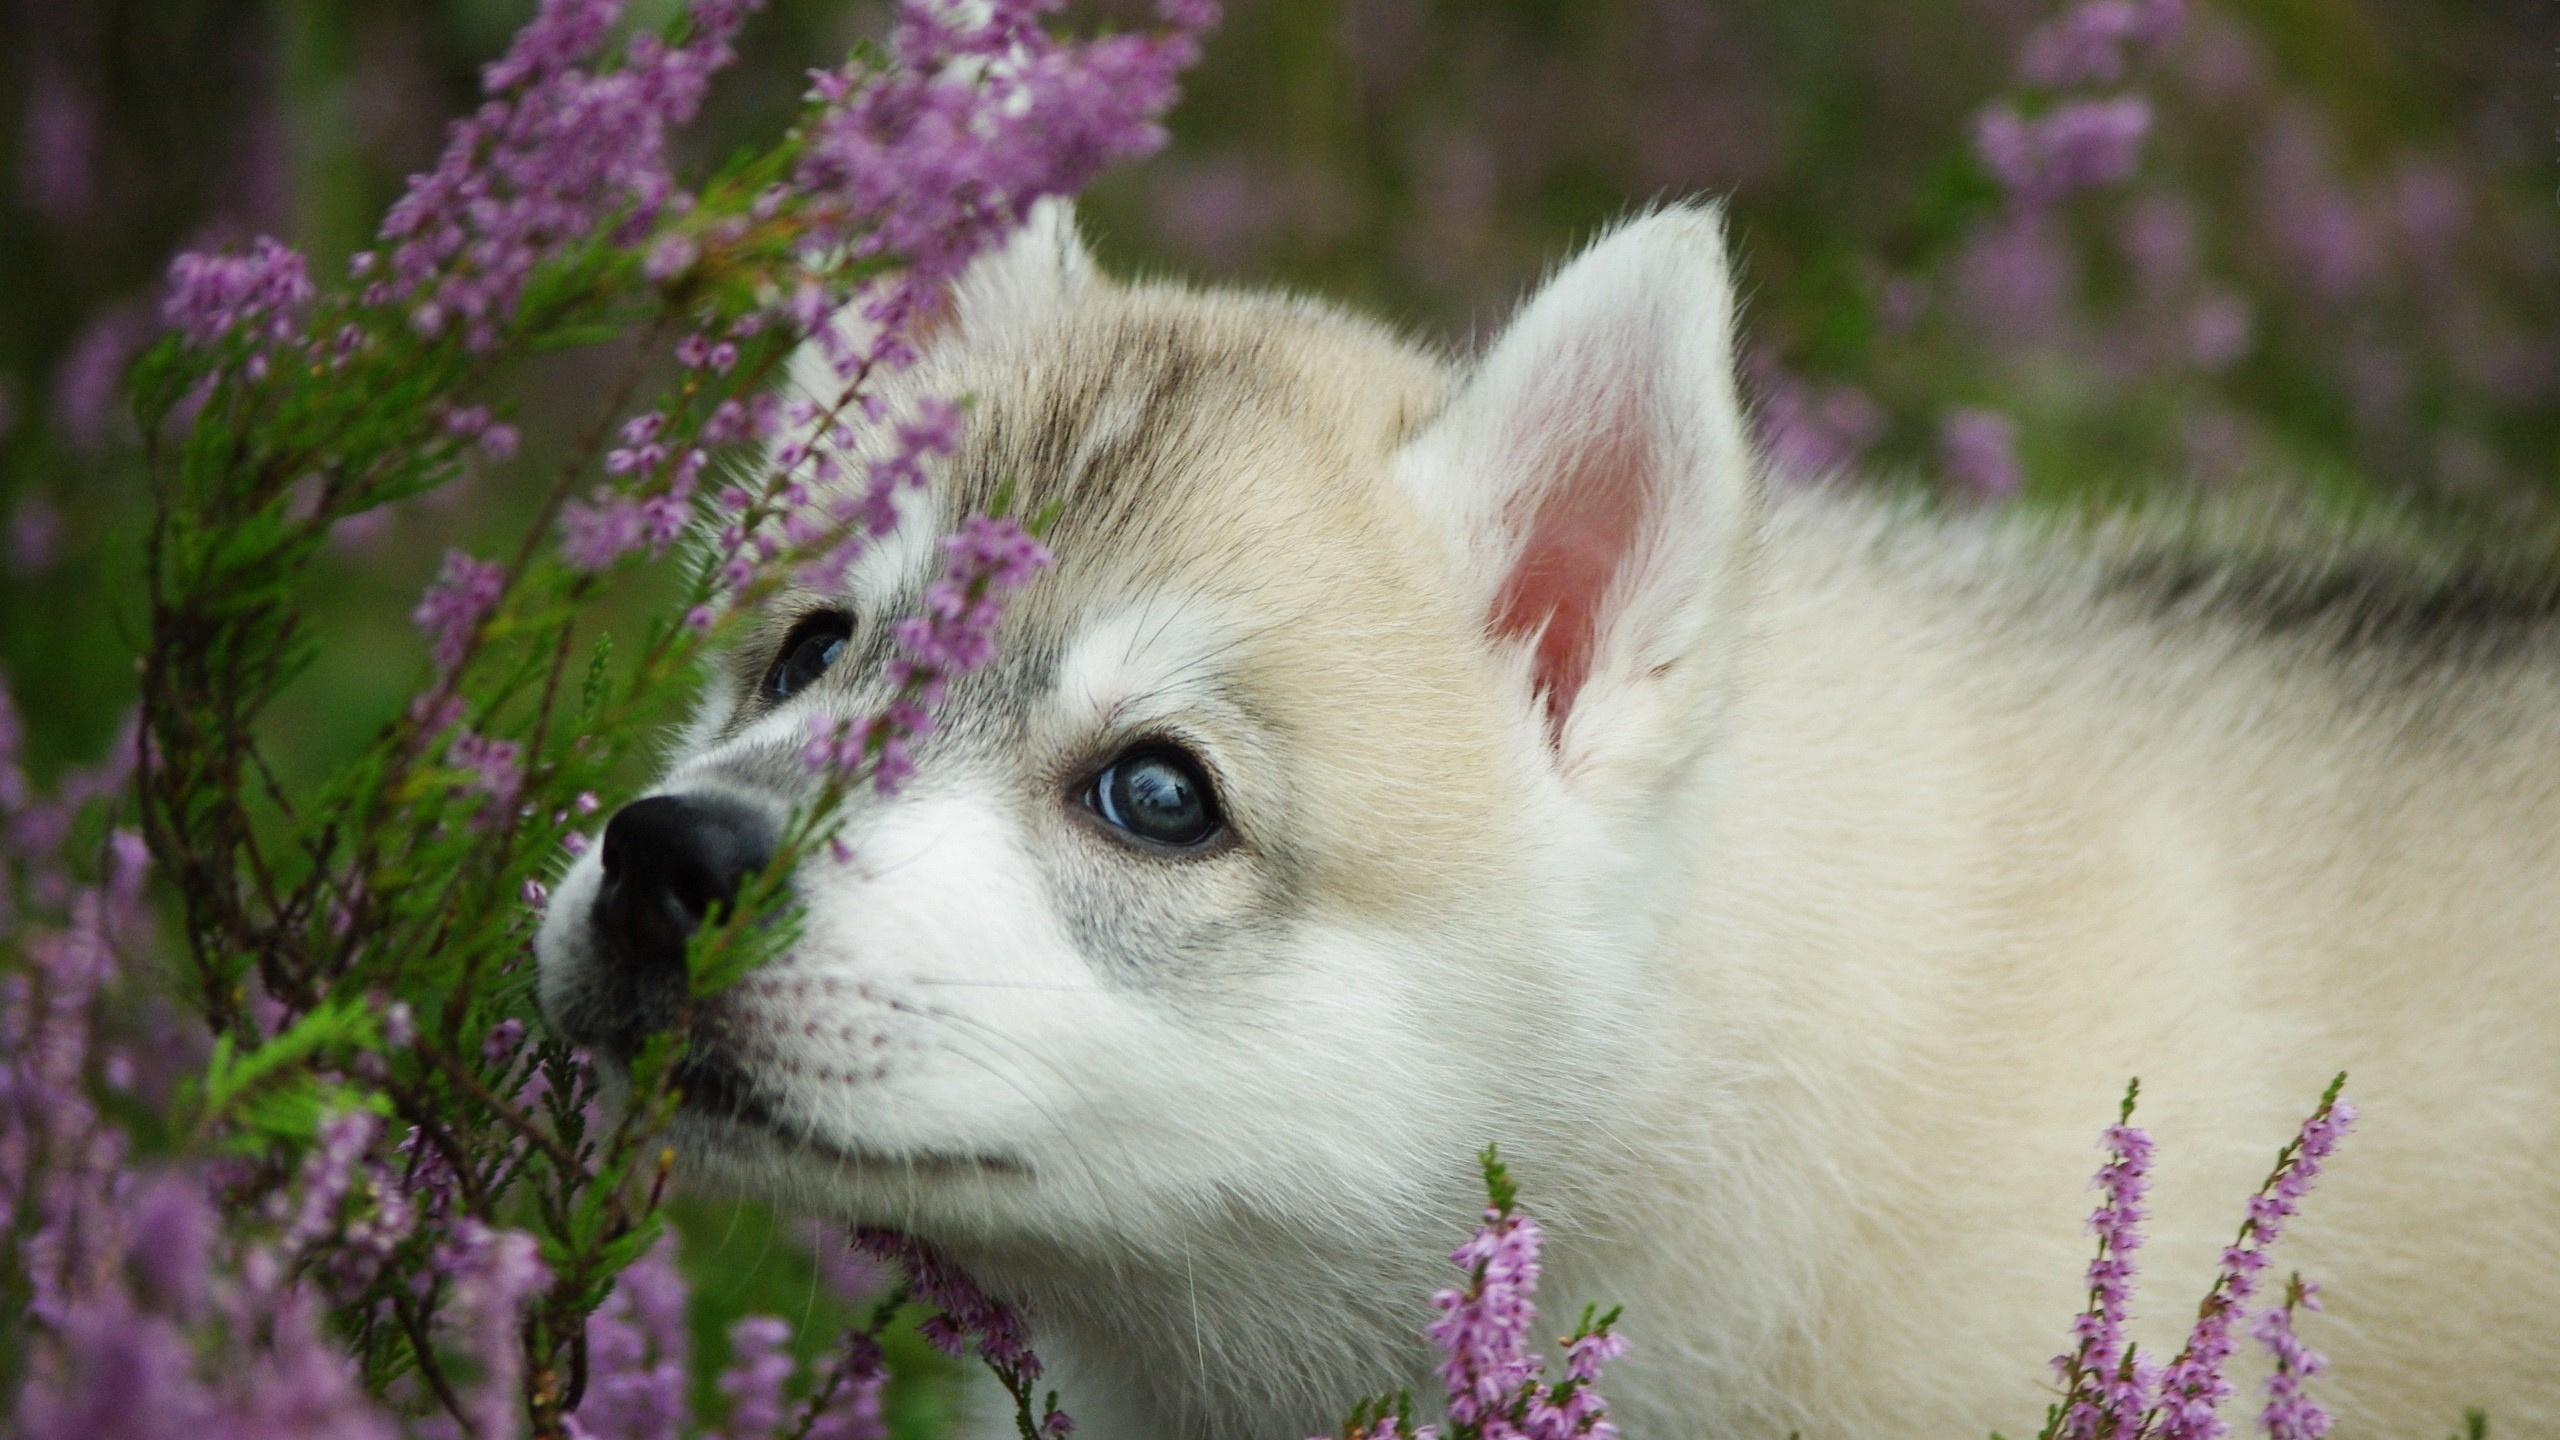 White and Brown Siberian Husky Puppy on Purple Flower Field During Daytime. Wallpaper in 2560x1440 Resolution